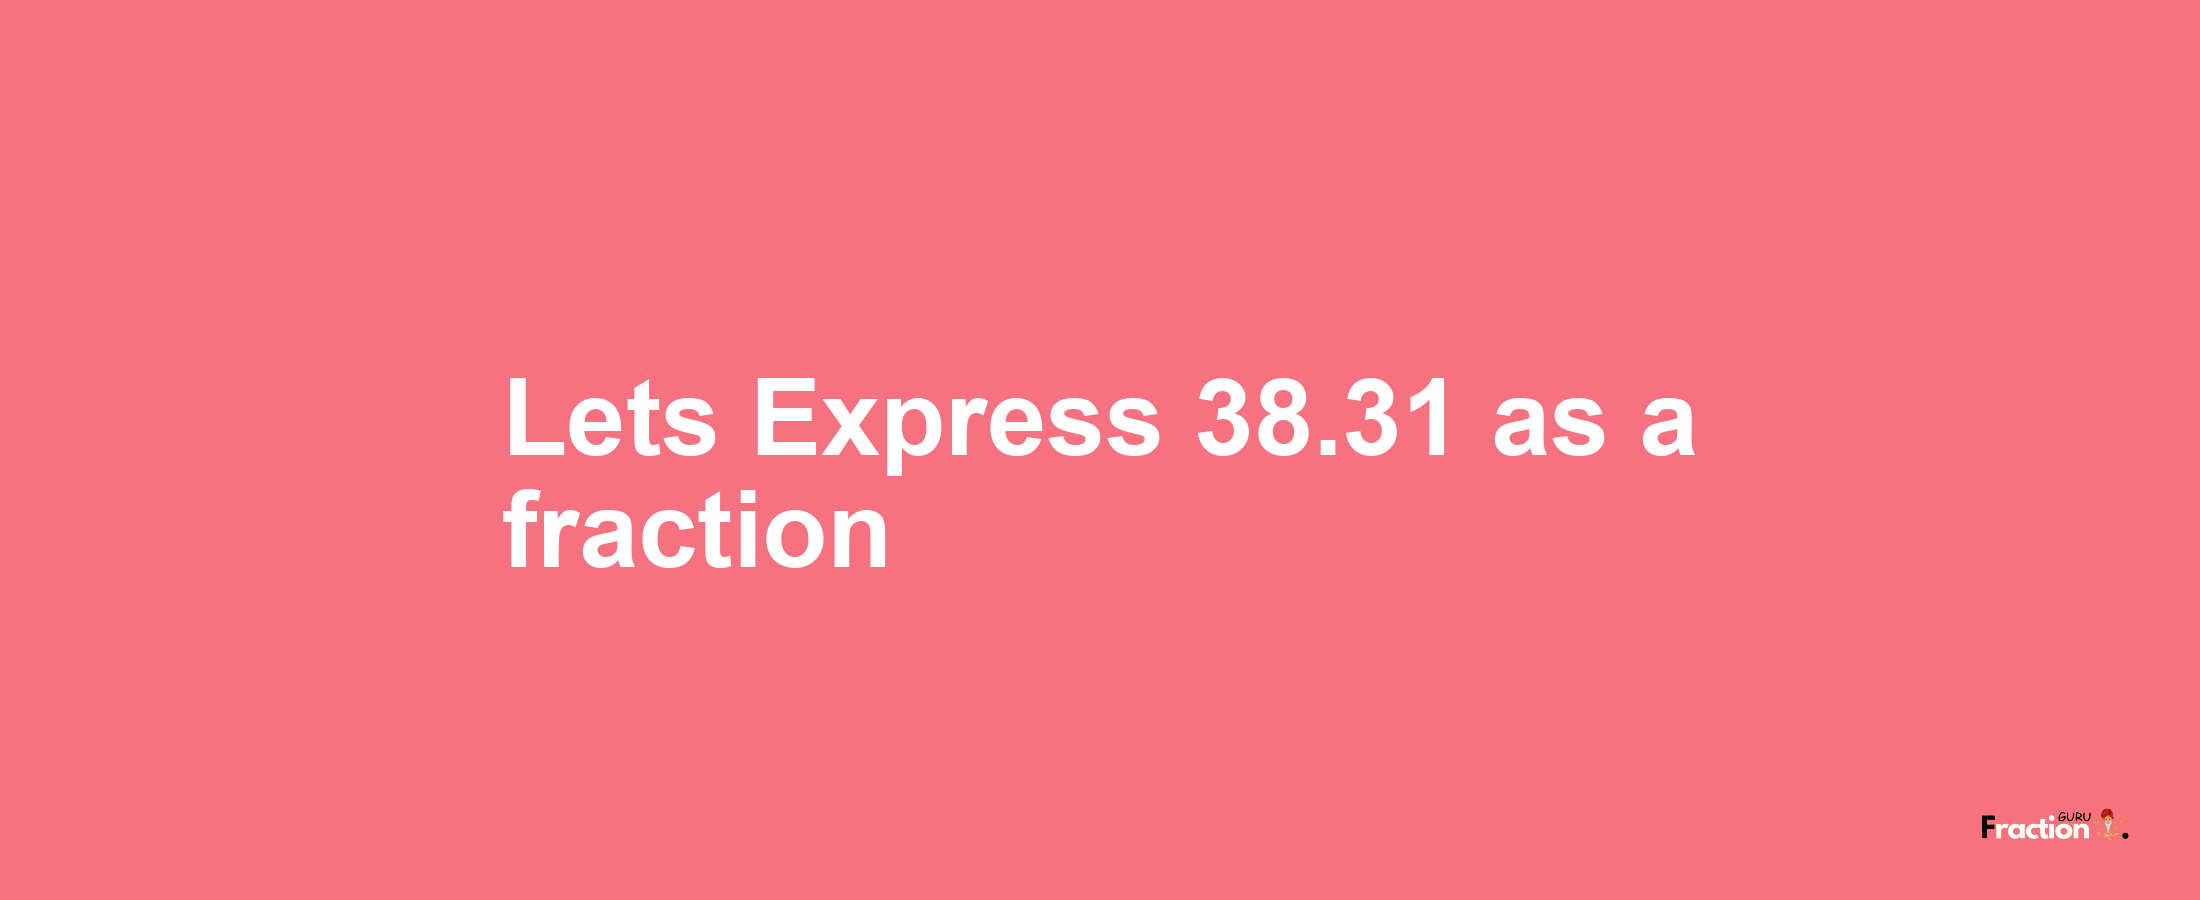 Lets Express 38.31 as afraction